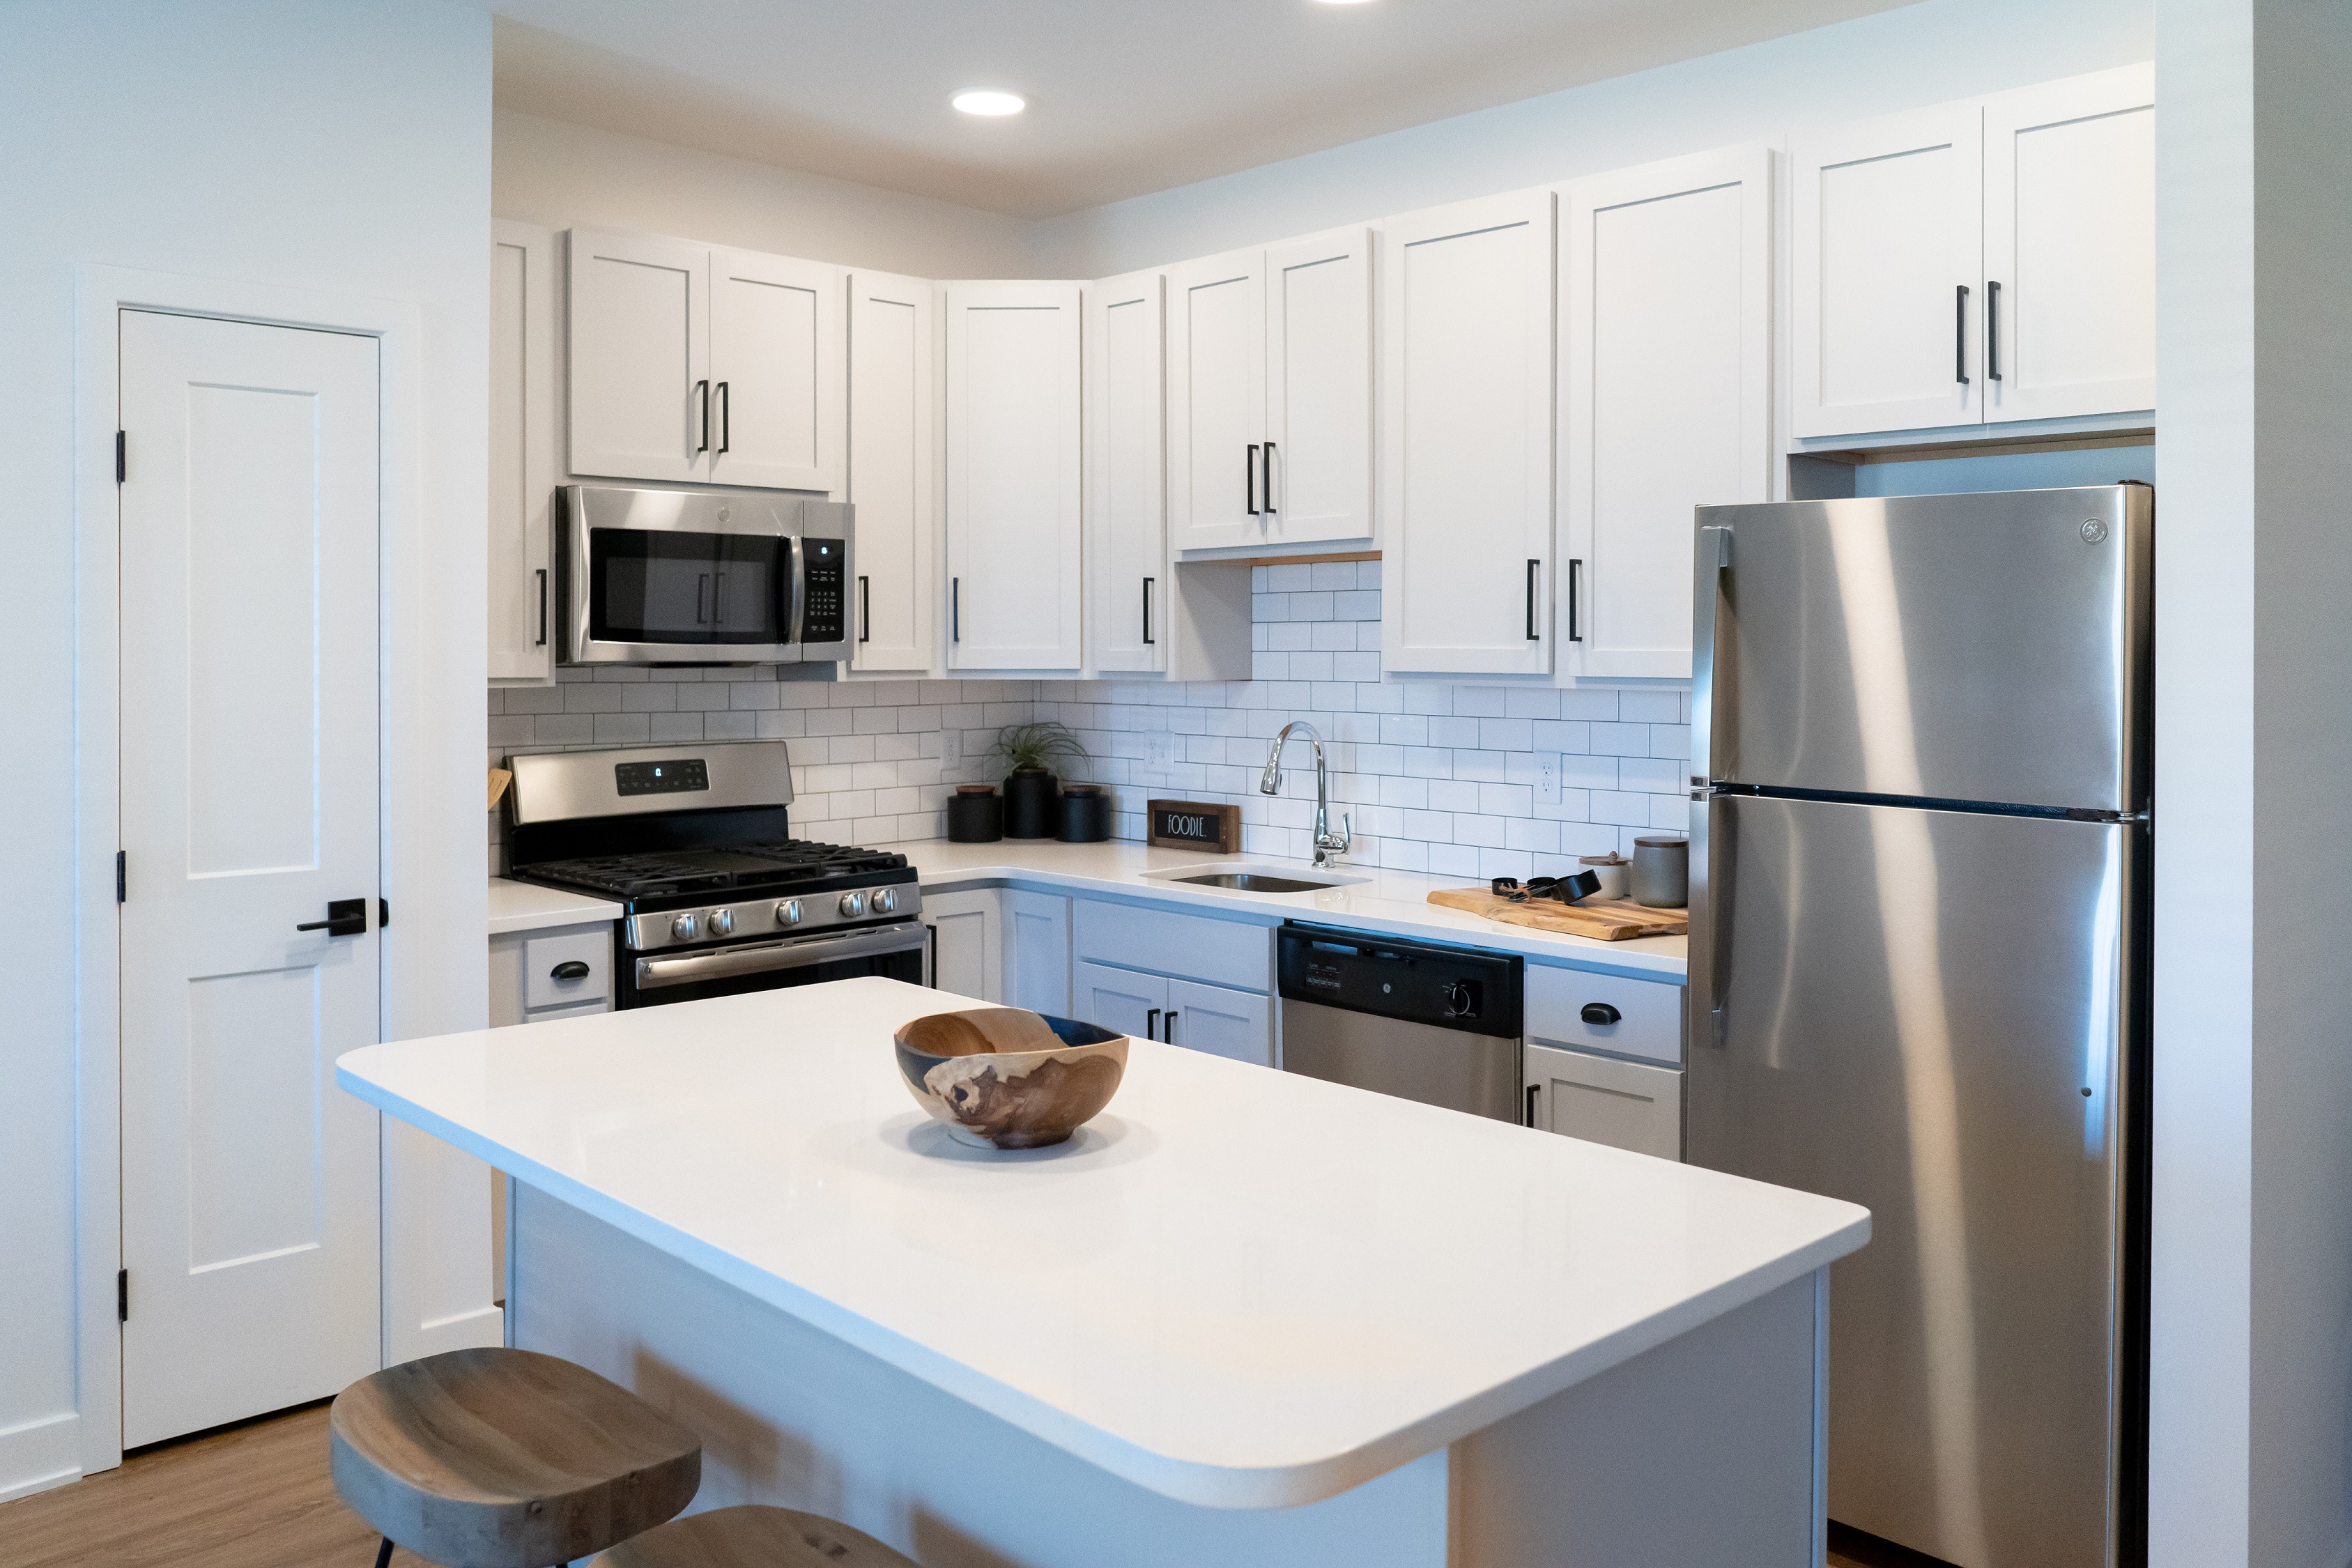 Westown’s modern kitchens have all the amenities any foodie would love!